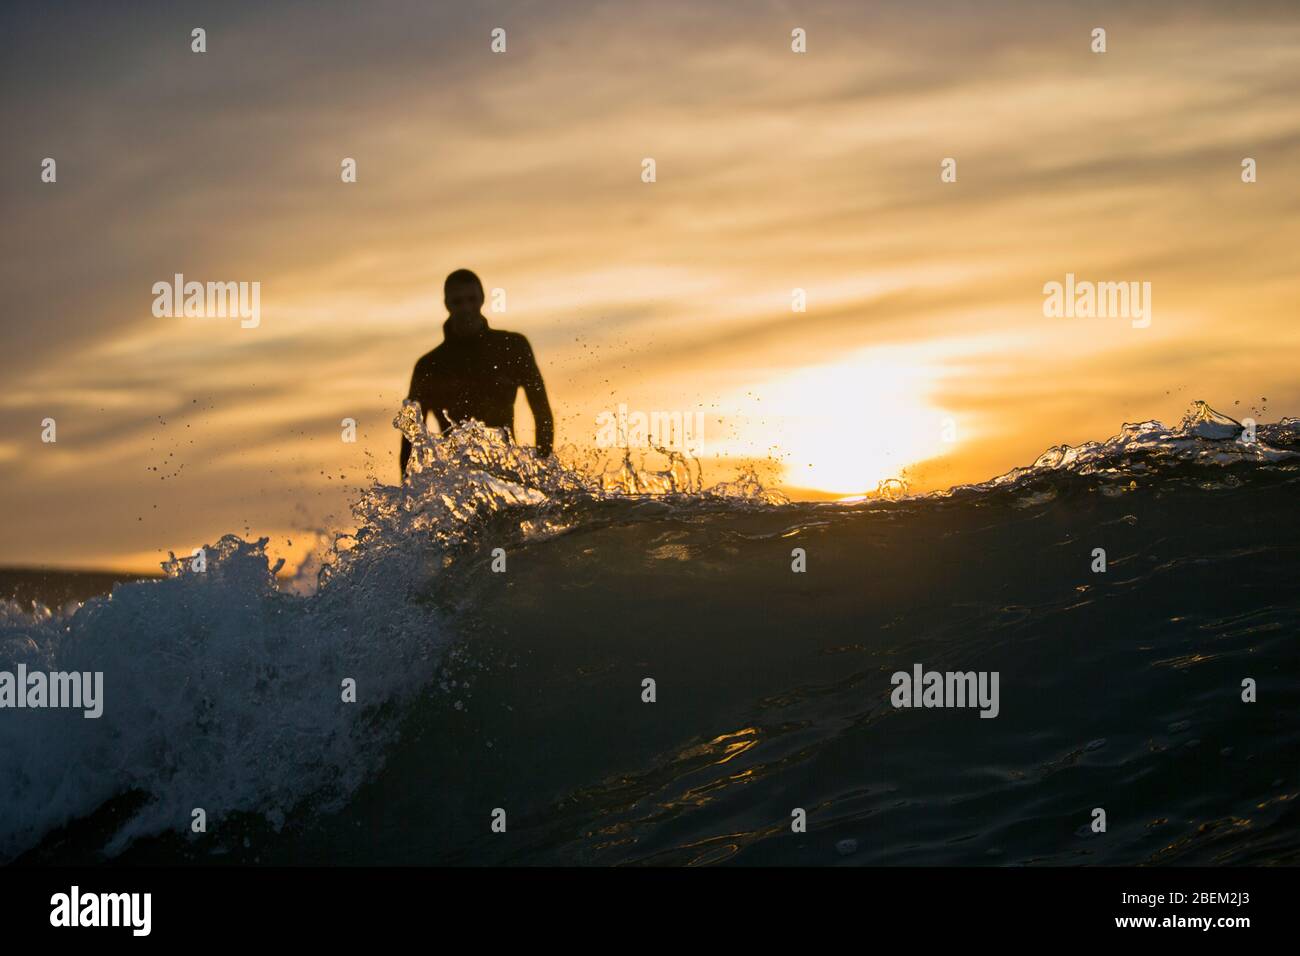 Silhouette of a man standing in the surf at sunset Stock Photo